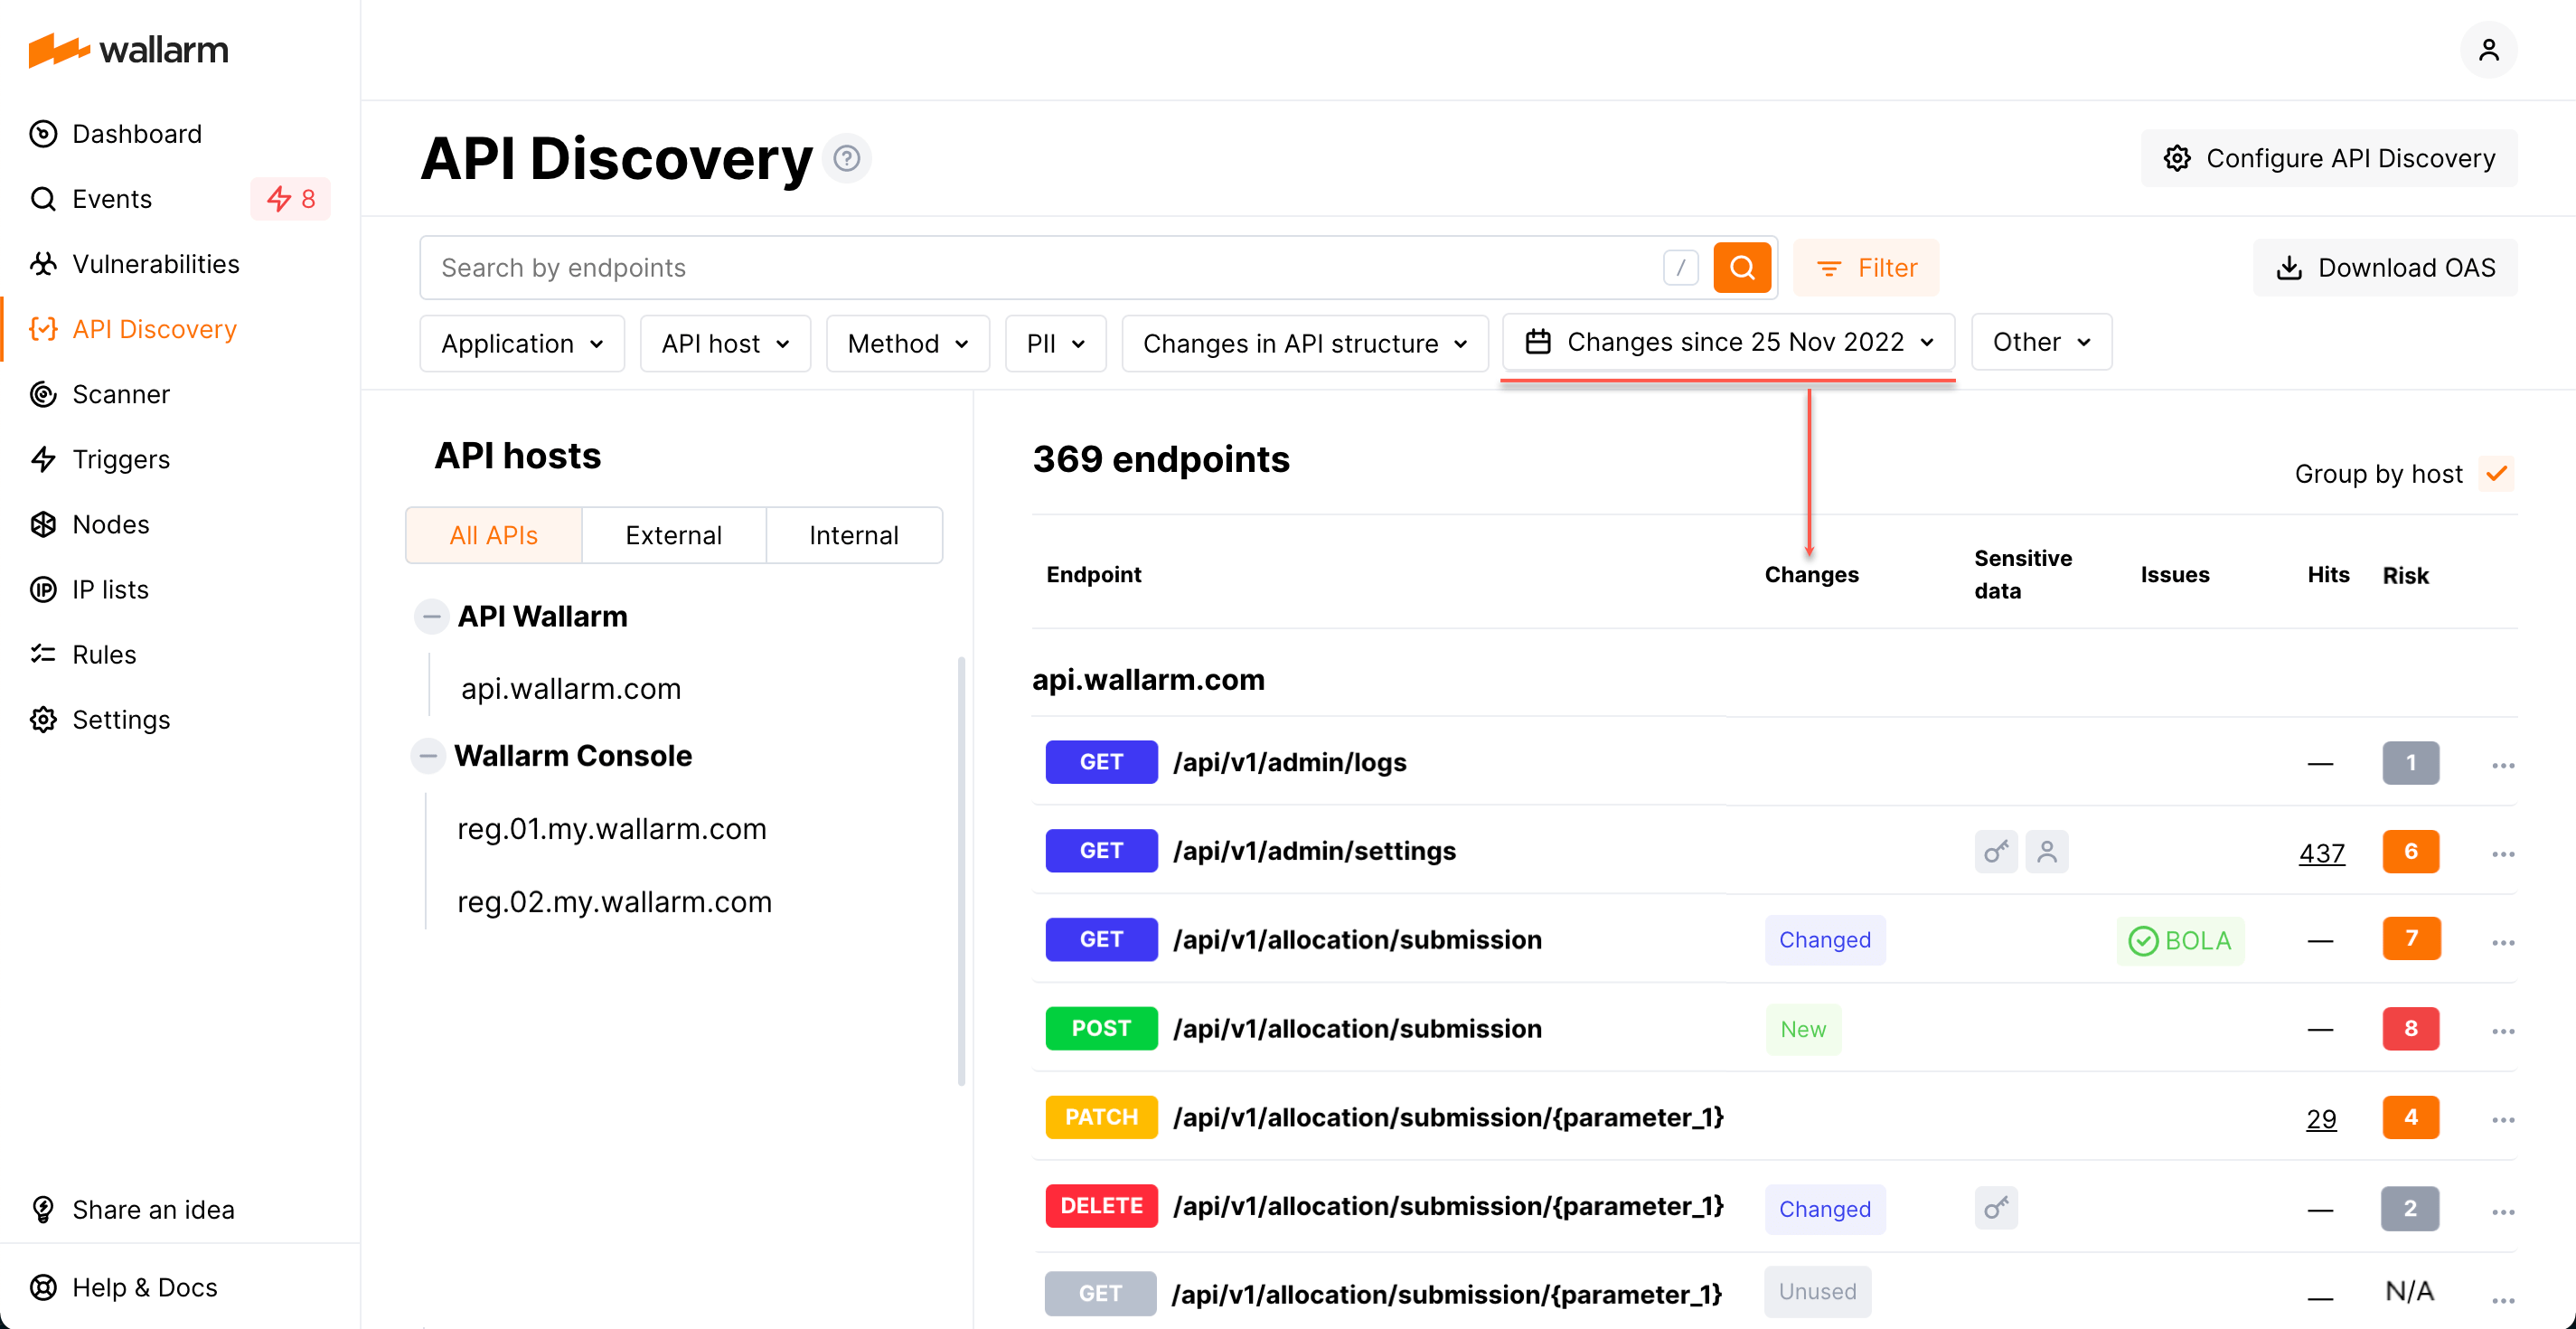 API Discovery - track changes